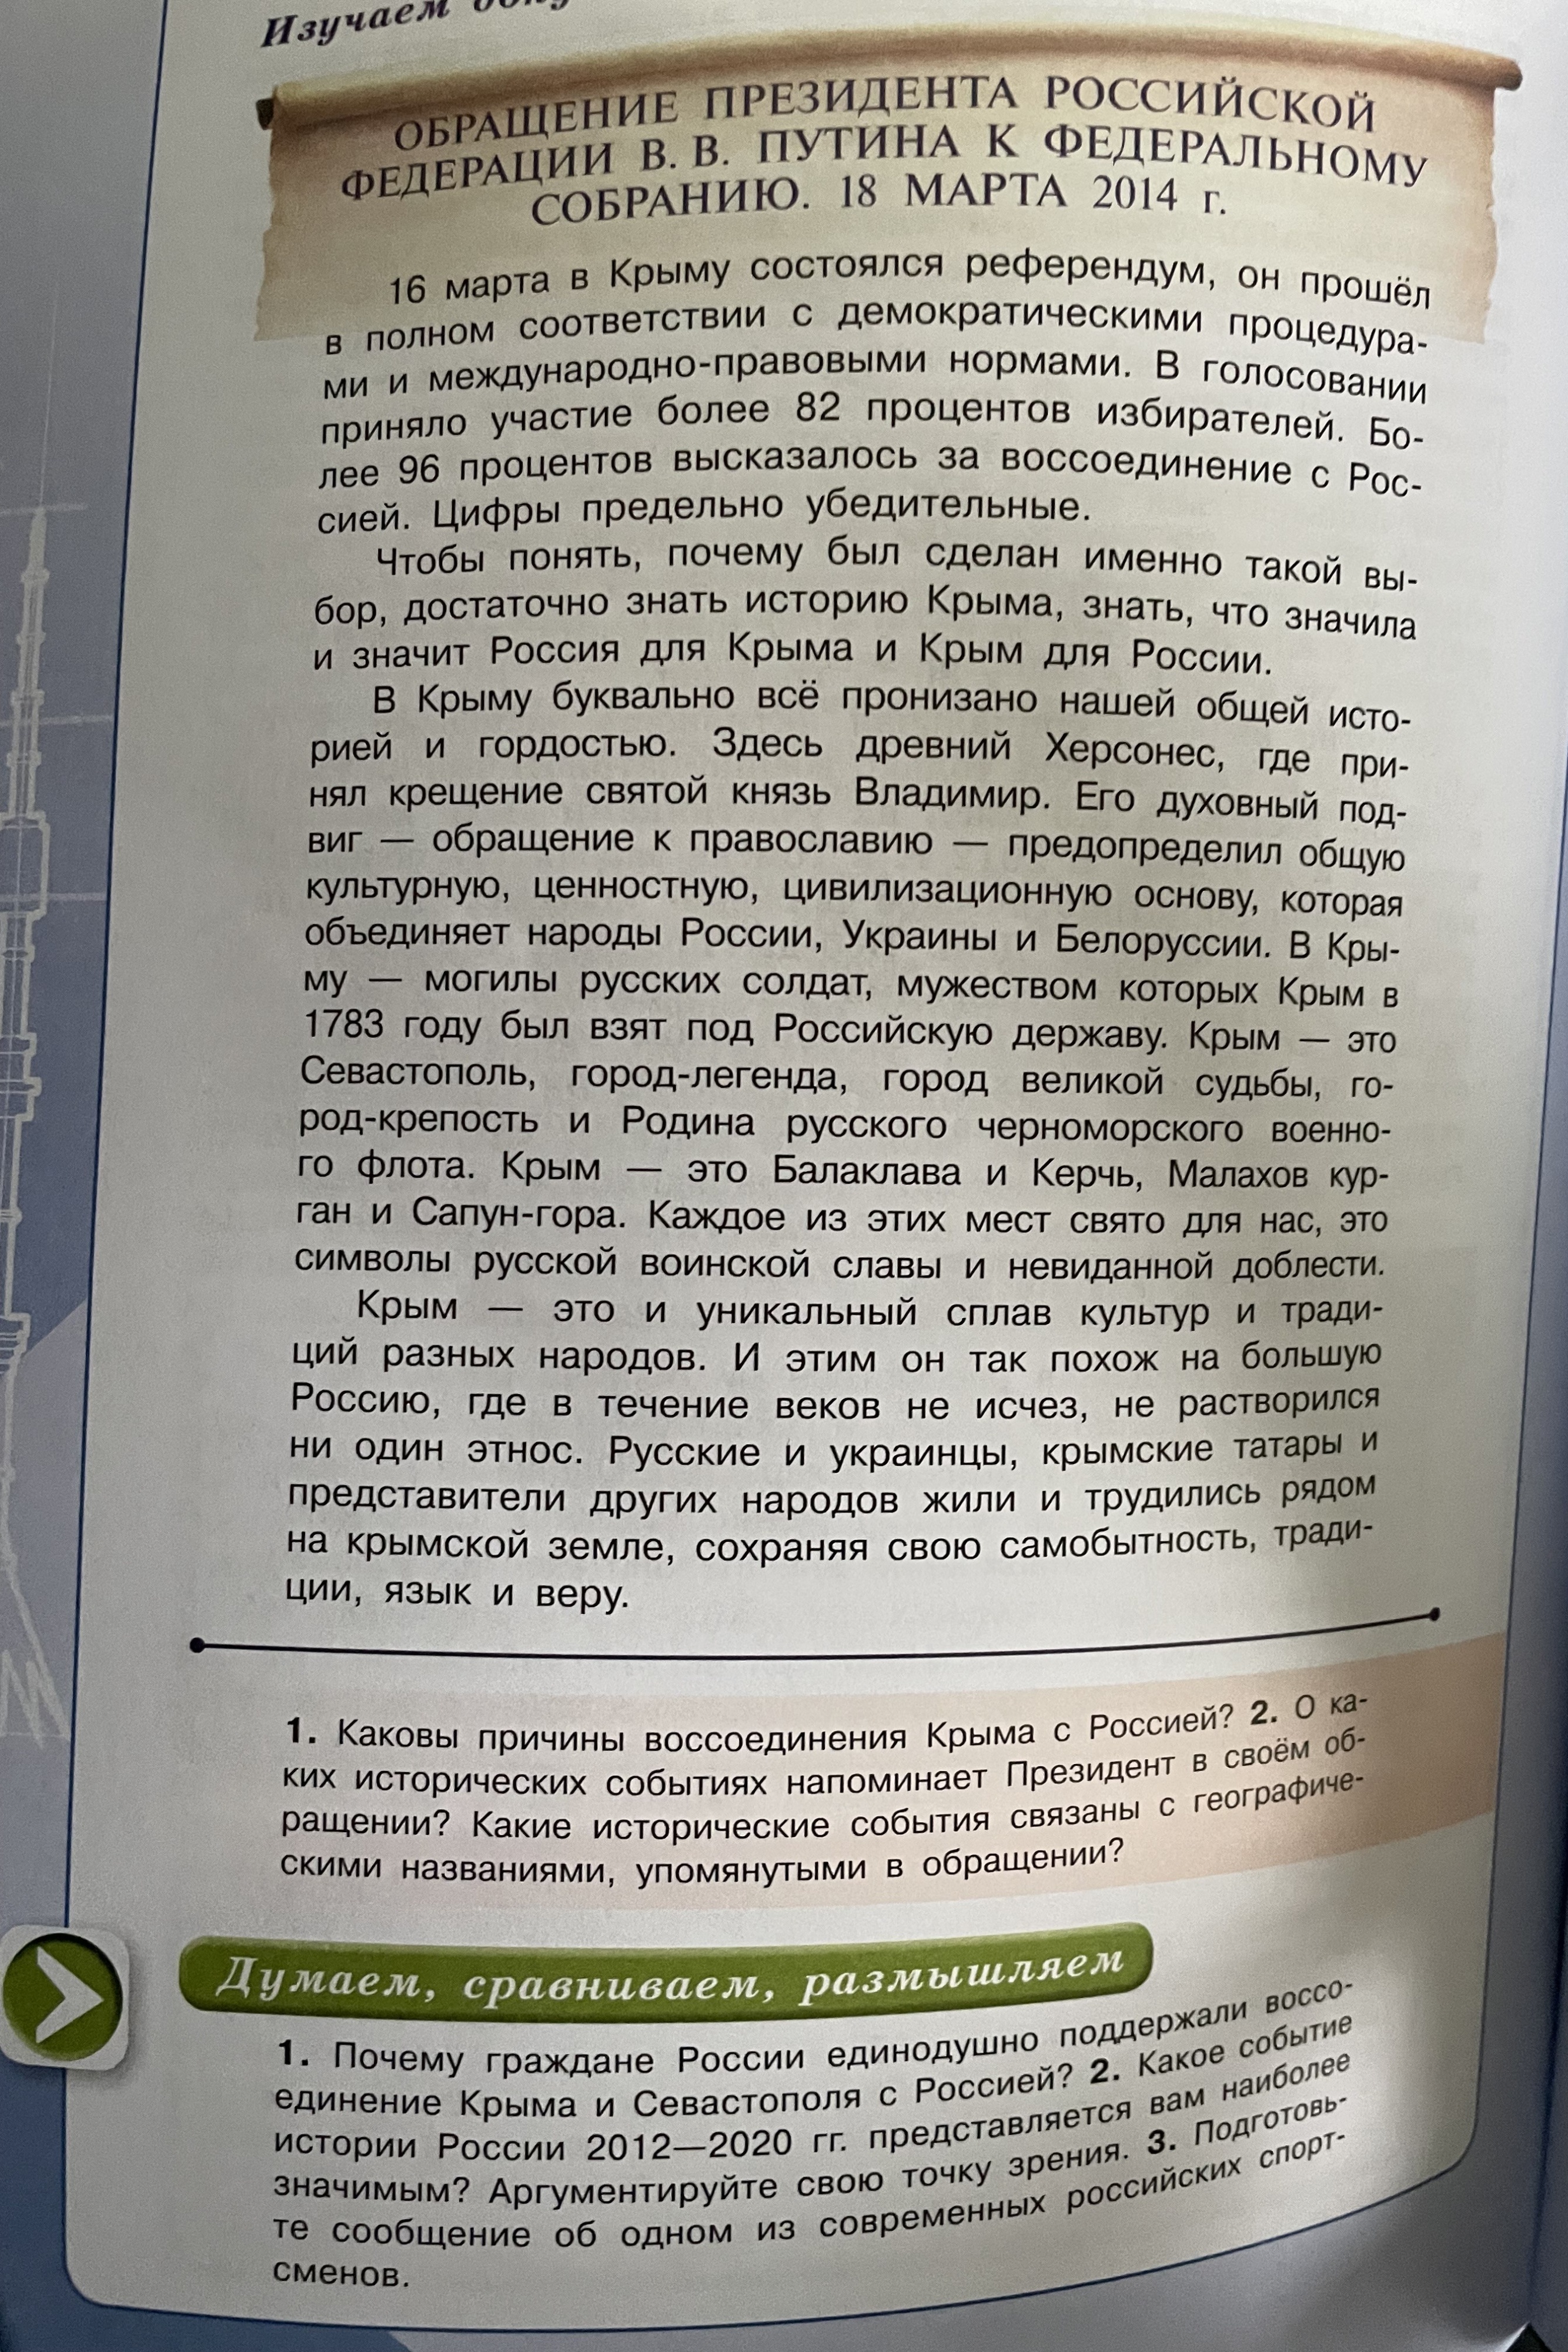 A textbook page in Russian RU